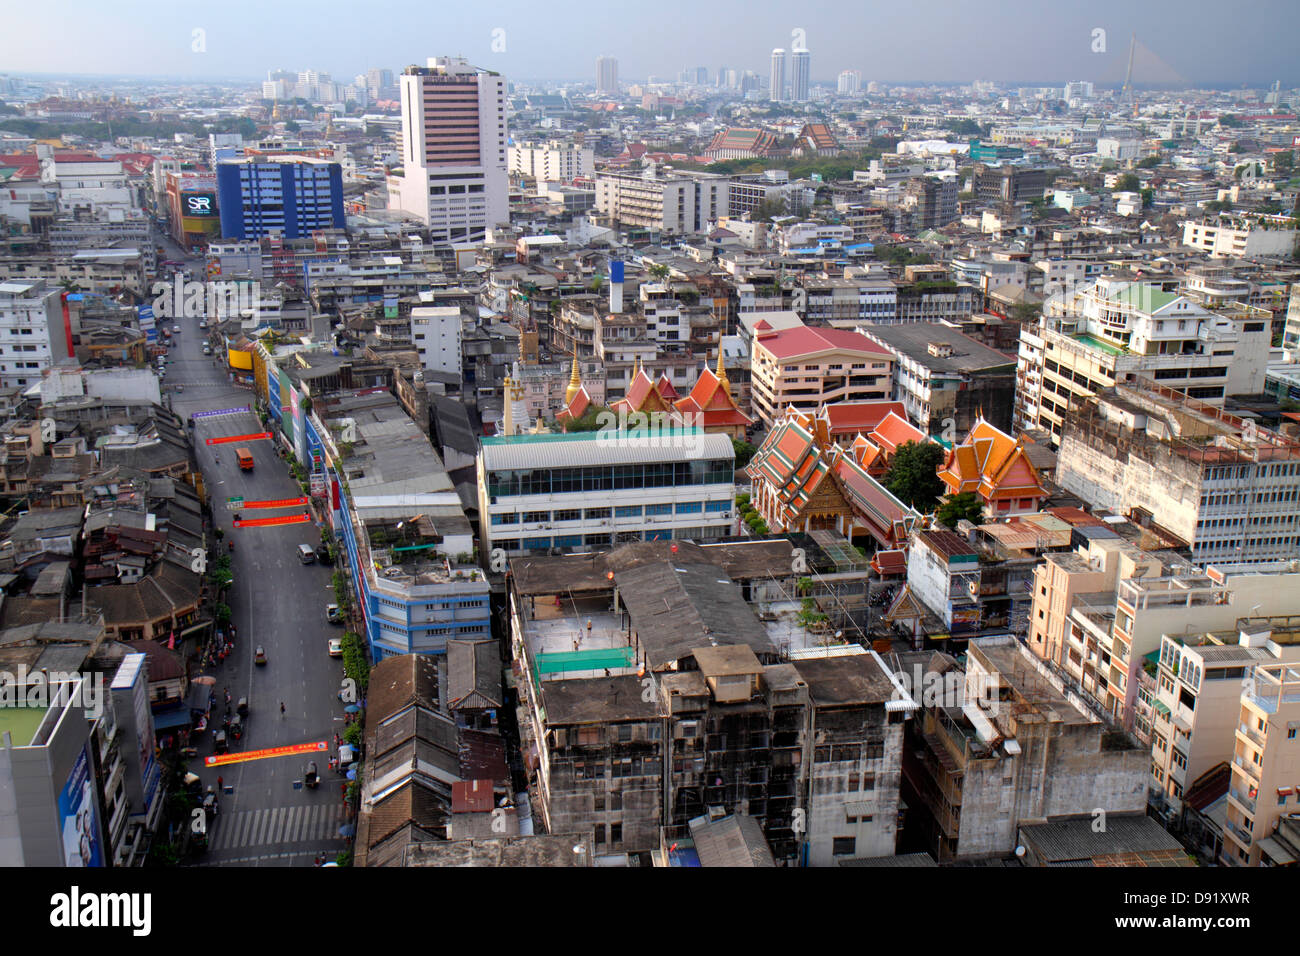 Bangkok Thailand,Thai,Samphanthawong,Chinatown,aerial overhead view from above,view,buildings,urban,city skyline,temple,Thai130209112 Stock Photo